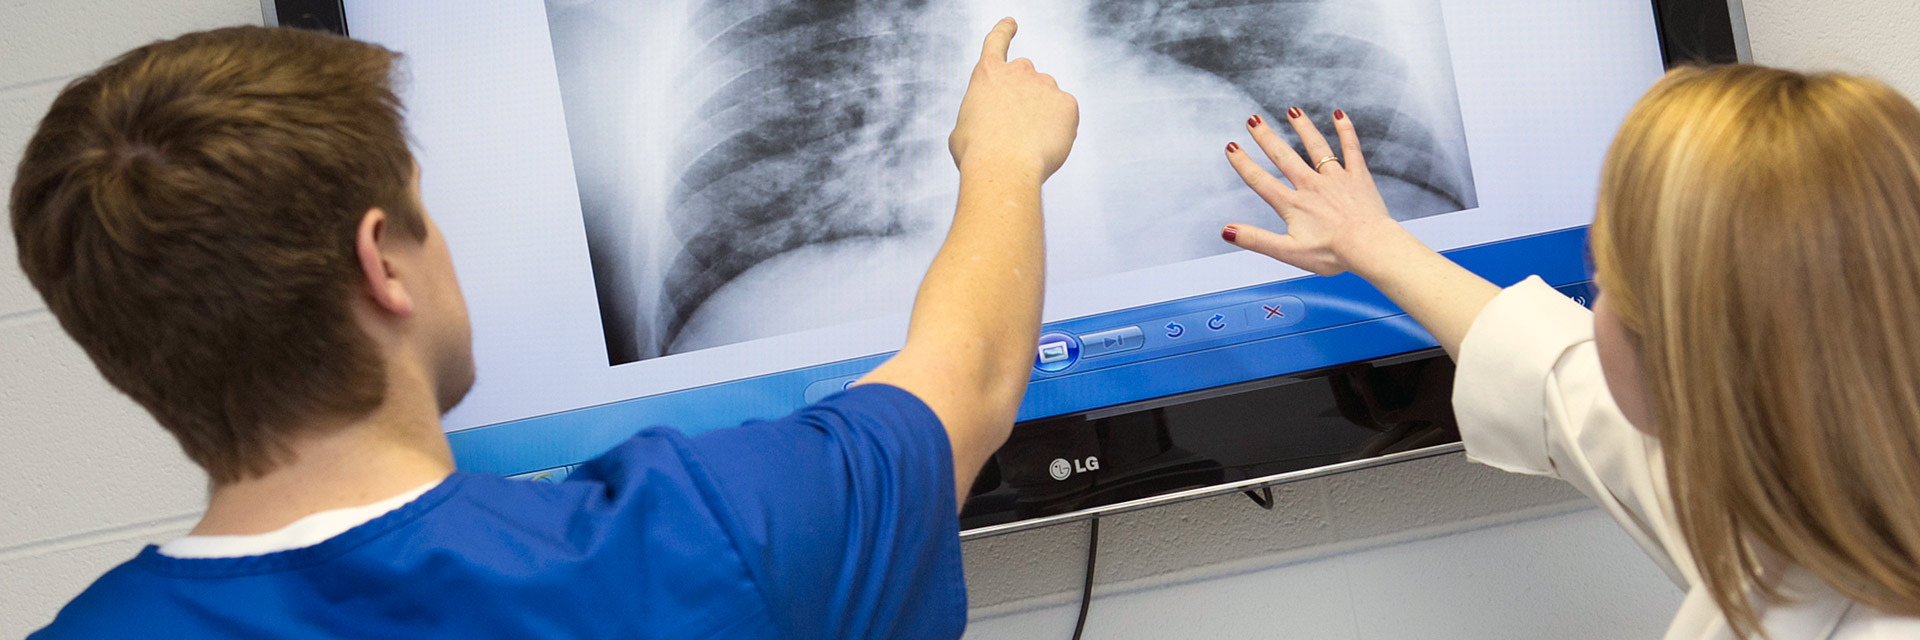 medical personnel examining lung xray